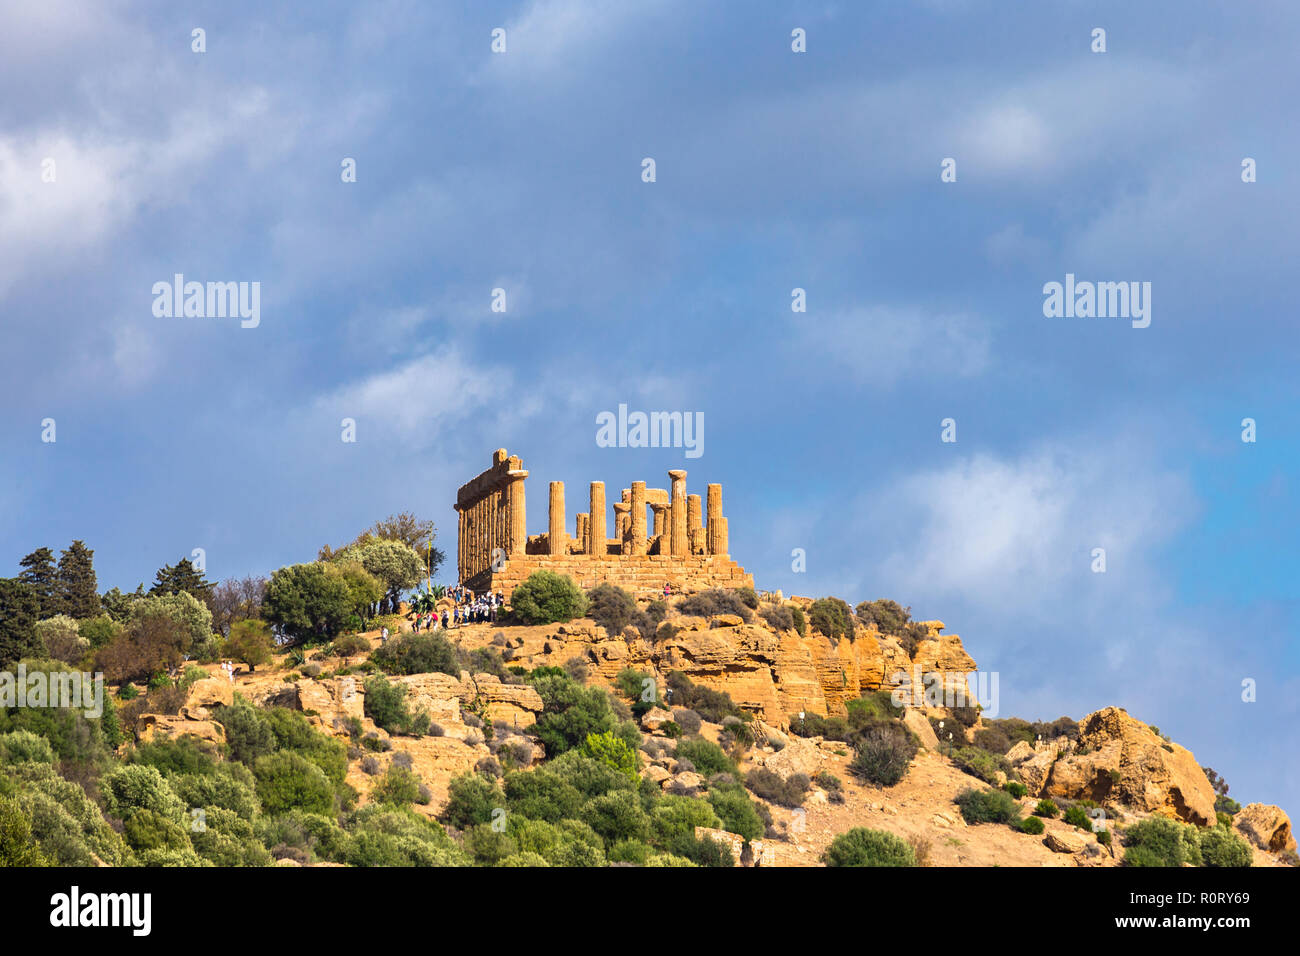 Valley of the Temples (Valle dei Templi) - valley of an ancient Greek Temple ruins built in the 5th century BC, Agrigento, Sicily, Italy. Stock Photo